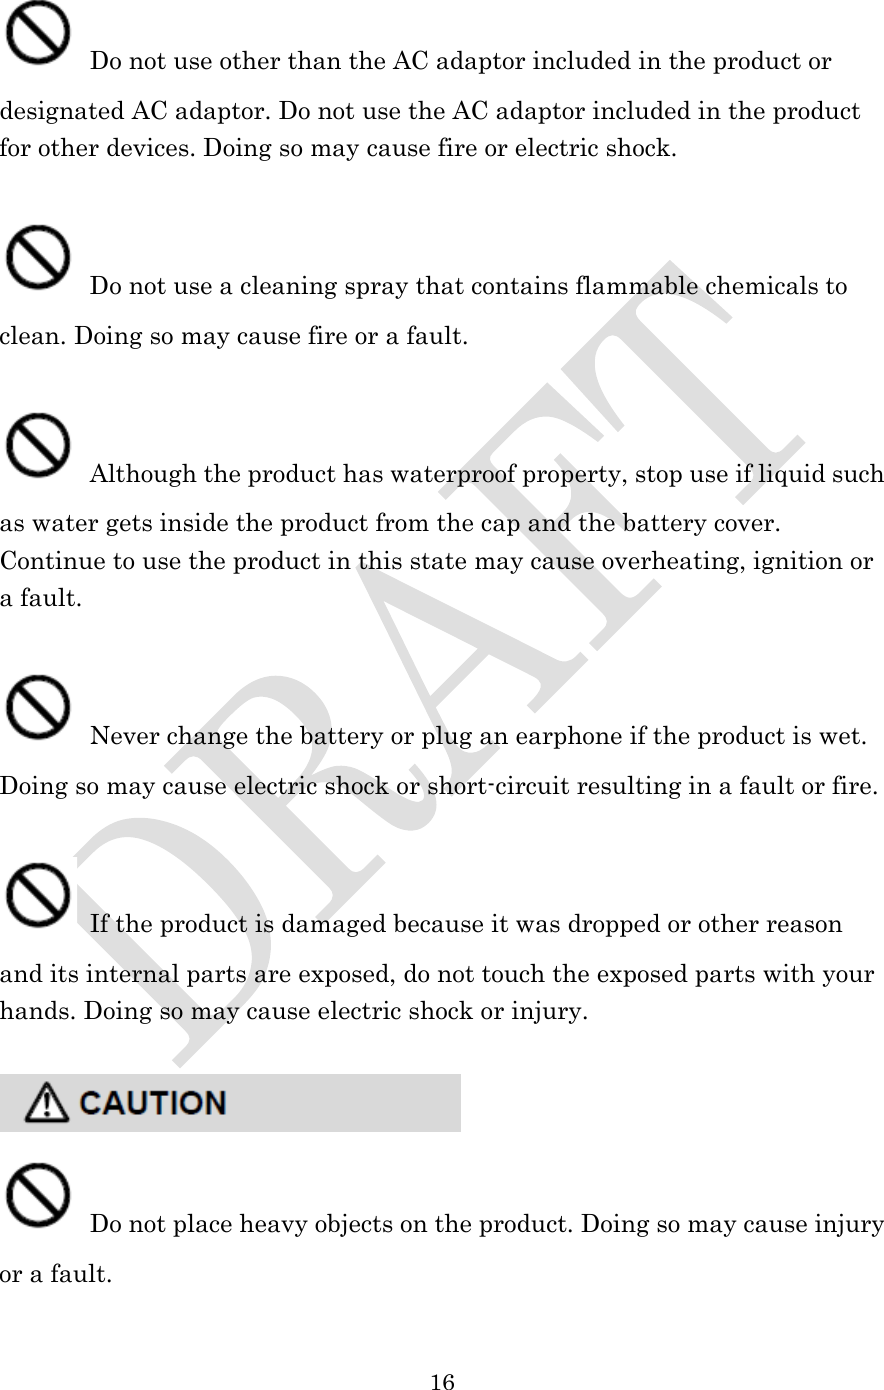  16   Do not use other than the AC adaptor included in the product or designated AC adaptor. Do not use the AC adaptor included in the product for other devices. Doing so may cause fire or electric shock.   Do not use a cleaning spray that contains flammable chemicals to clean. Doing so may cause fire or a fault.   Although the product has waterproof property, stop use if liquid such as water gets inside the product from the cap and the battery cover. Continue to use the product in this state may cause overheating, ignition or a fault.   Never change the battery or plug an earphone if the product is wet. Doing so may cause electric shock or short-circuit resulting in a fault or fire.   If the product is damaged because it was dropped or other reason and its internal parts are exposed, do not touch the exposed parts with your hands. Doing so may cause electric shock or injury.      Do not place heavy objects on the product. Doing so may cause injury or a fault.  